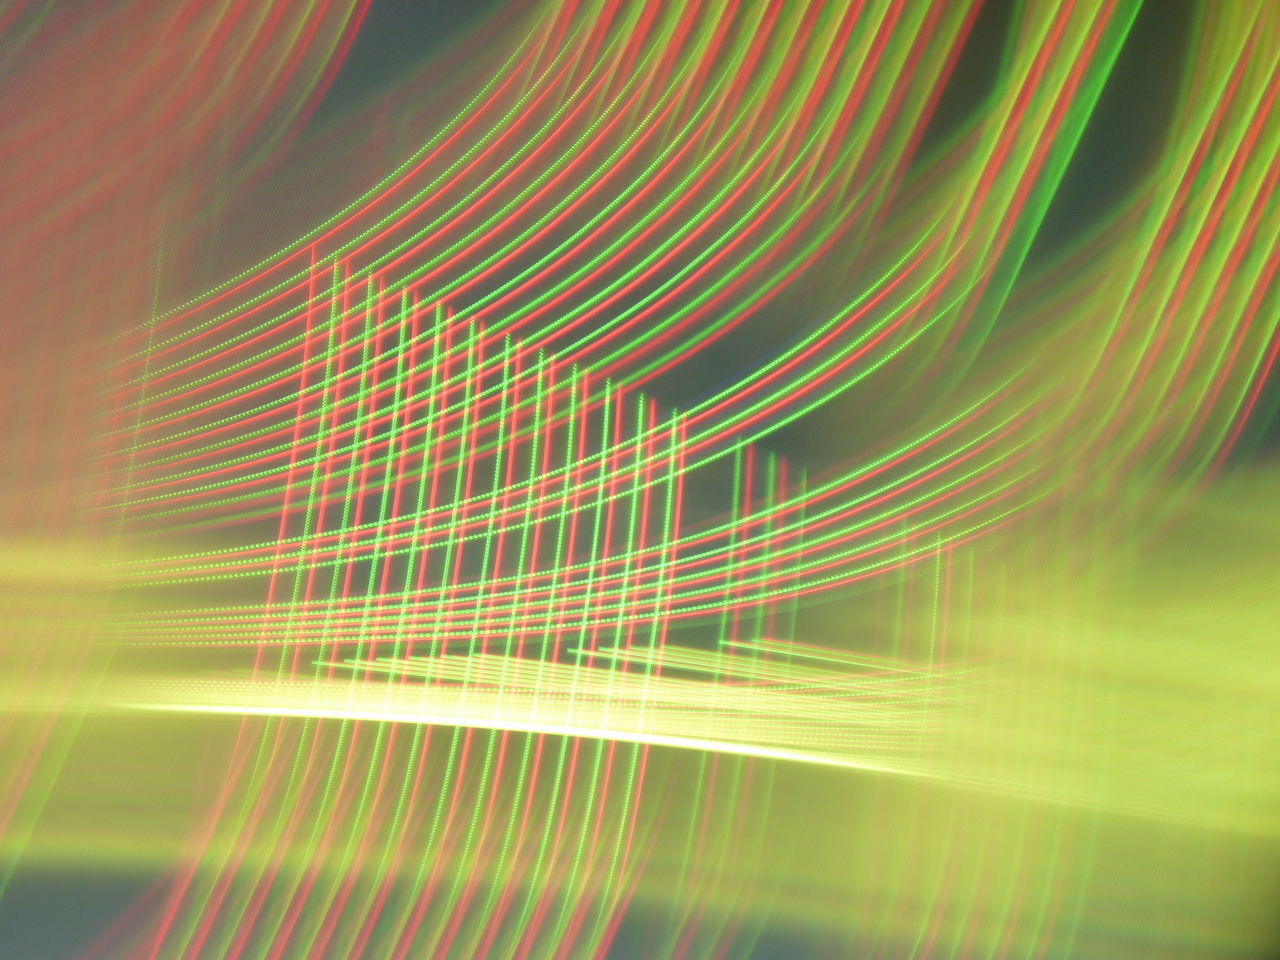 ABSTRACT IMAGE OF LIGHT TRAILS